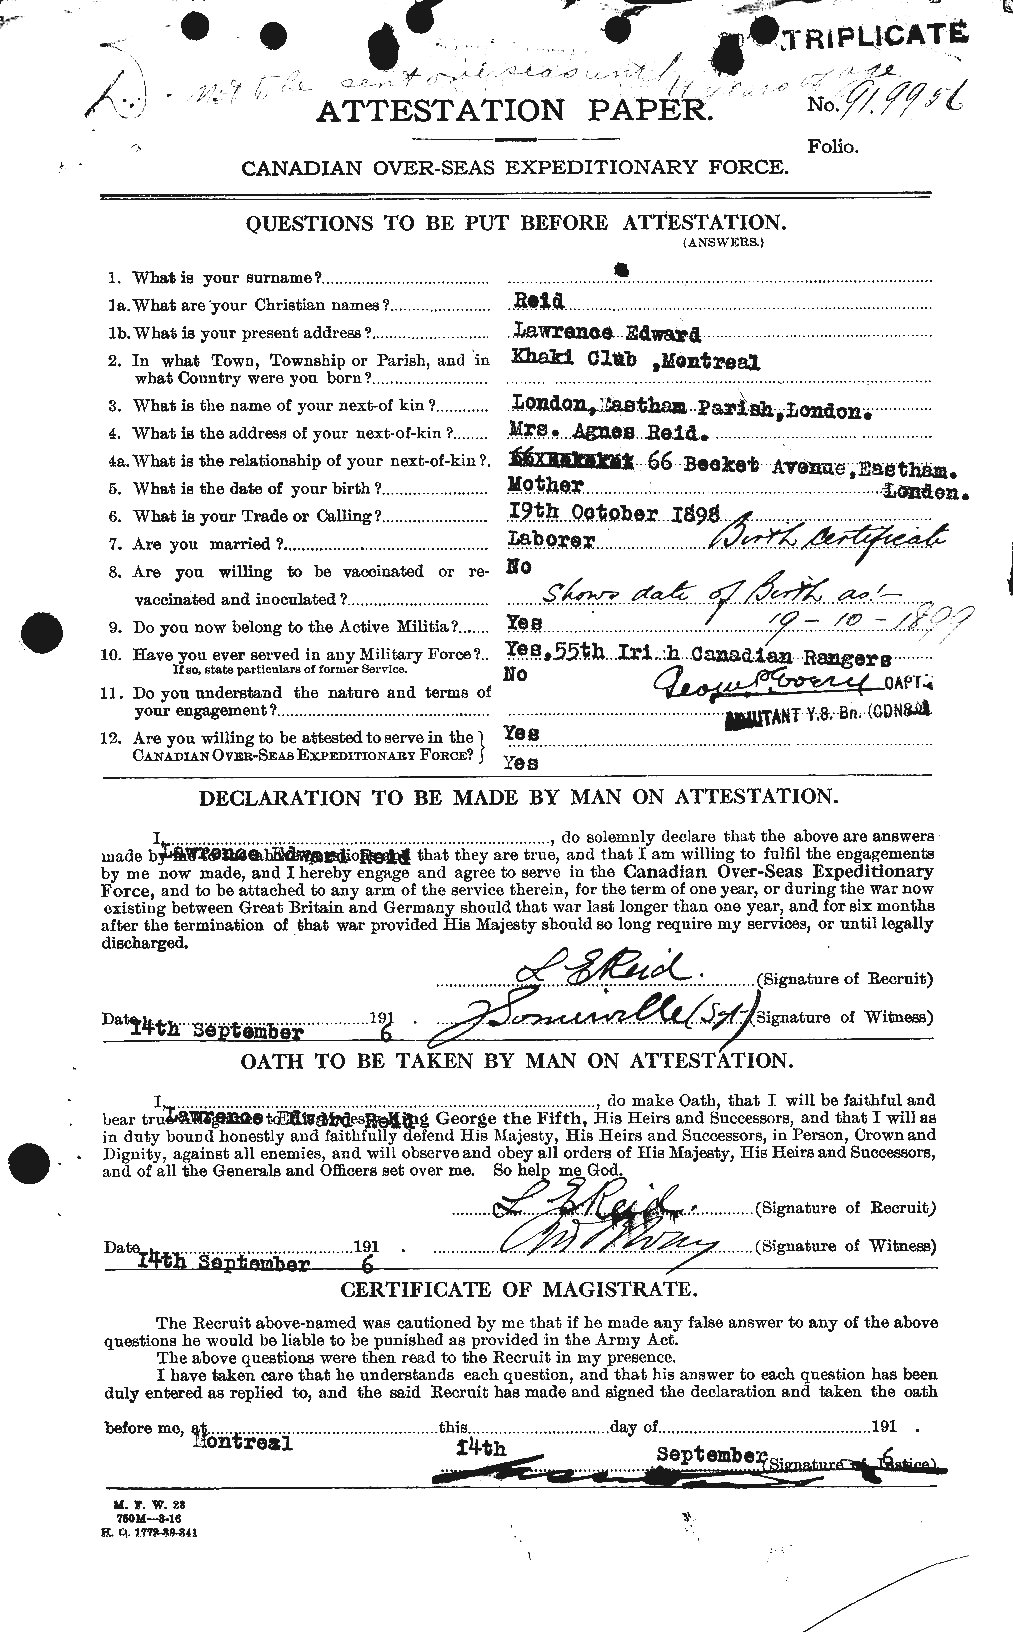 Personnel Records of the First World War - CEF 598912a